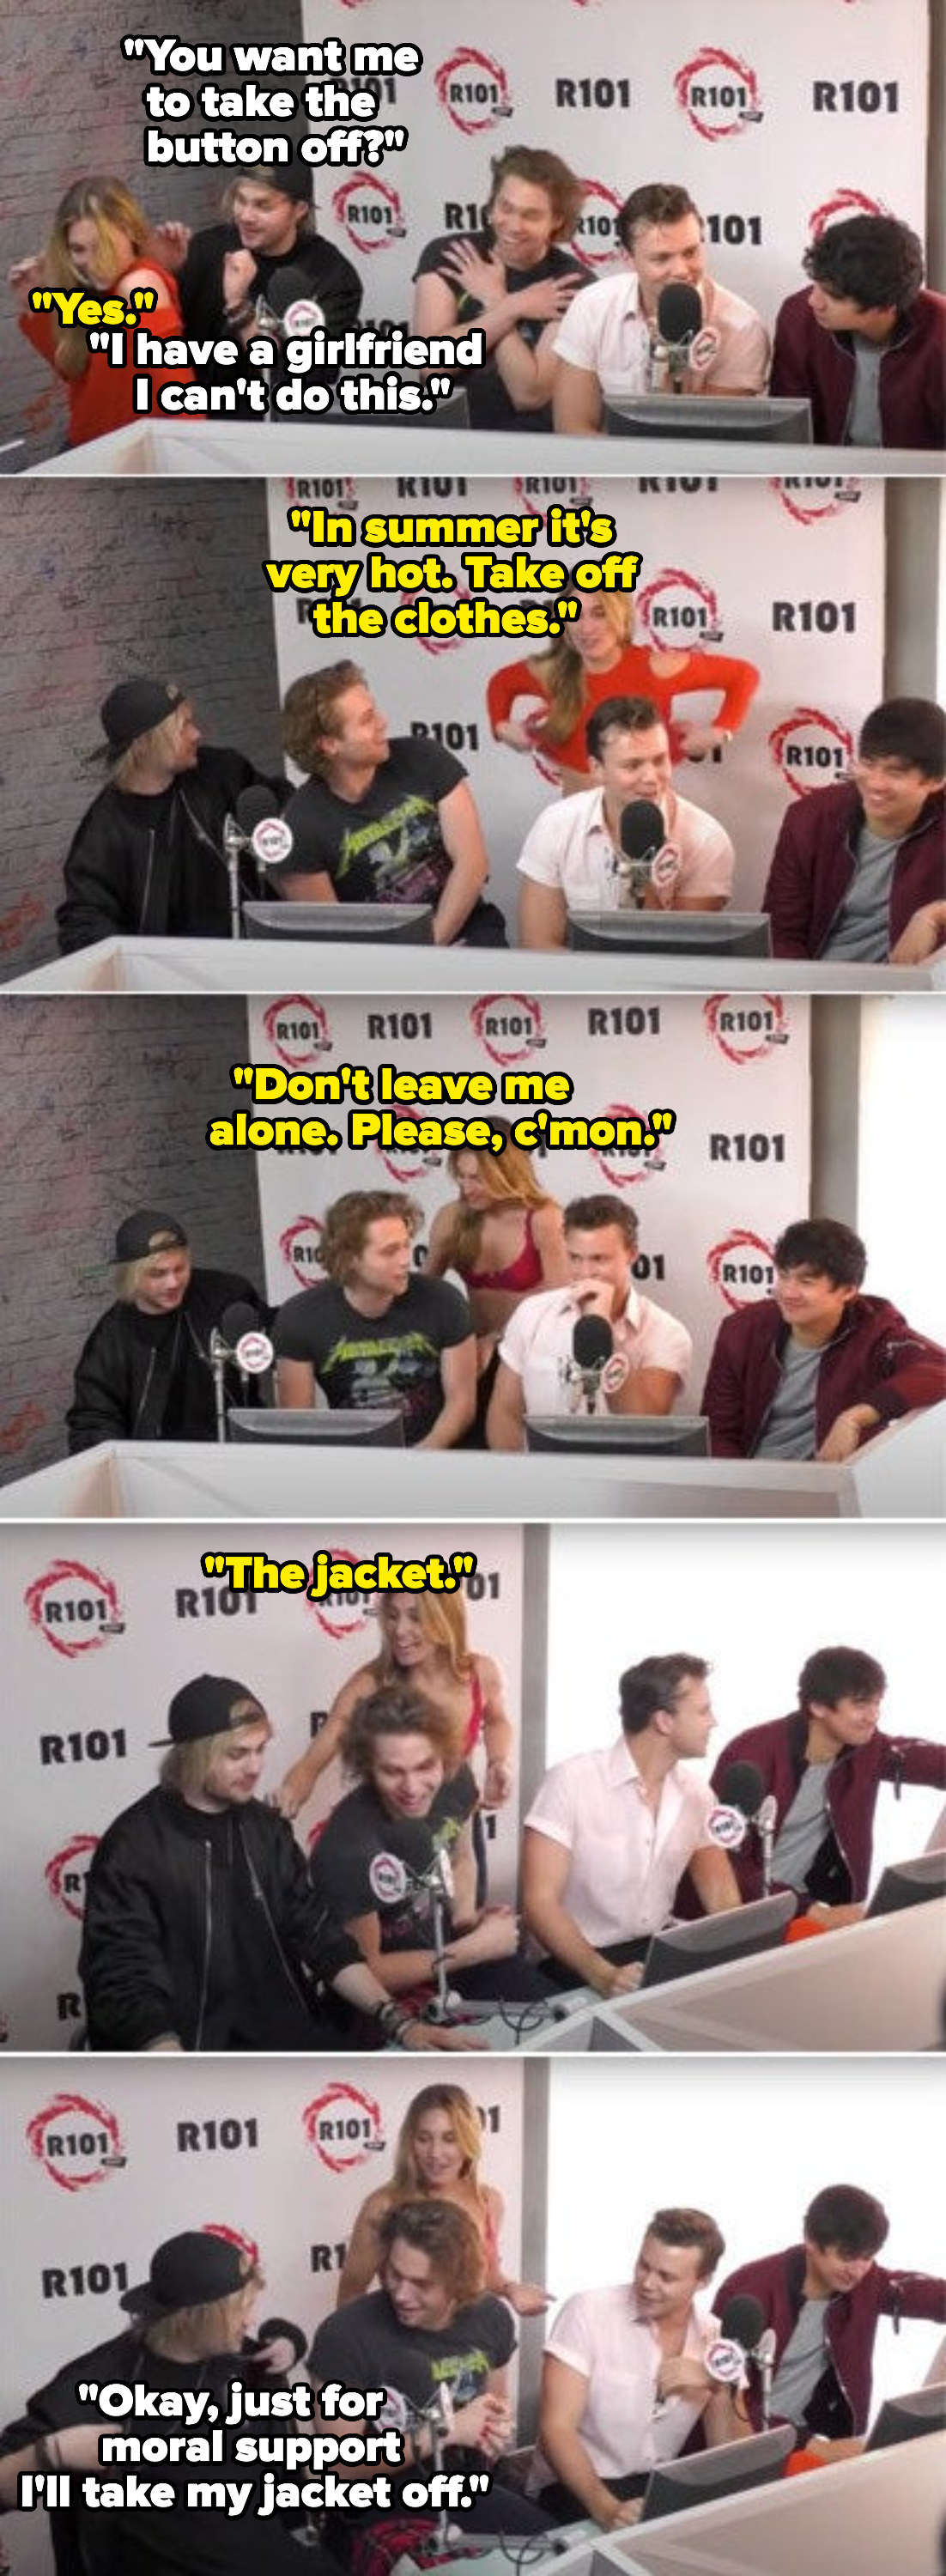 An interviewer taking her shirt off and then begging the band members to take their shirts off too